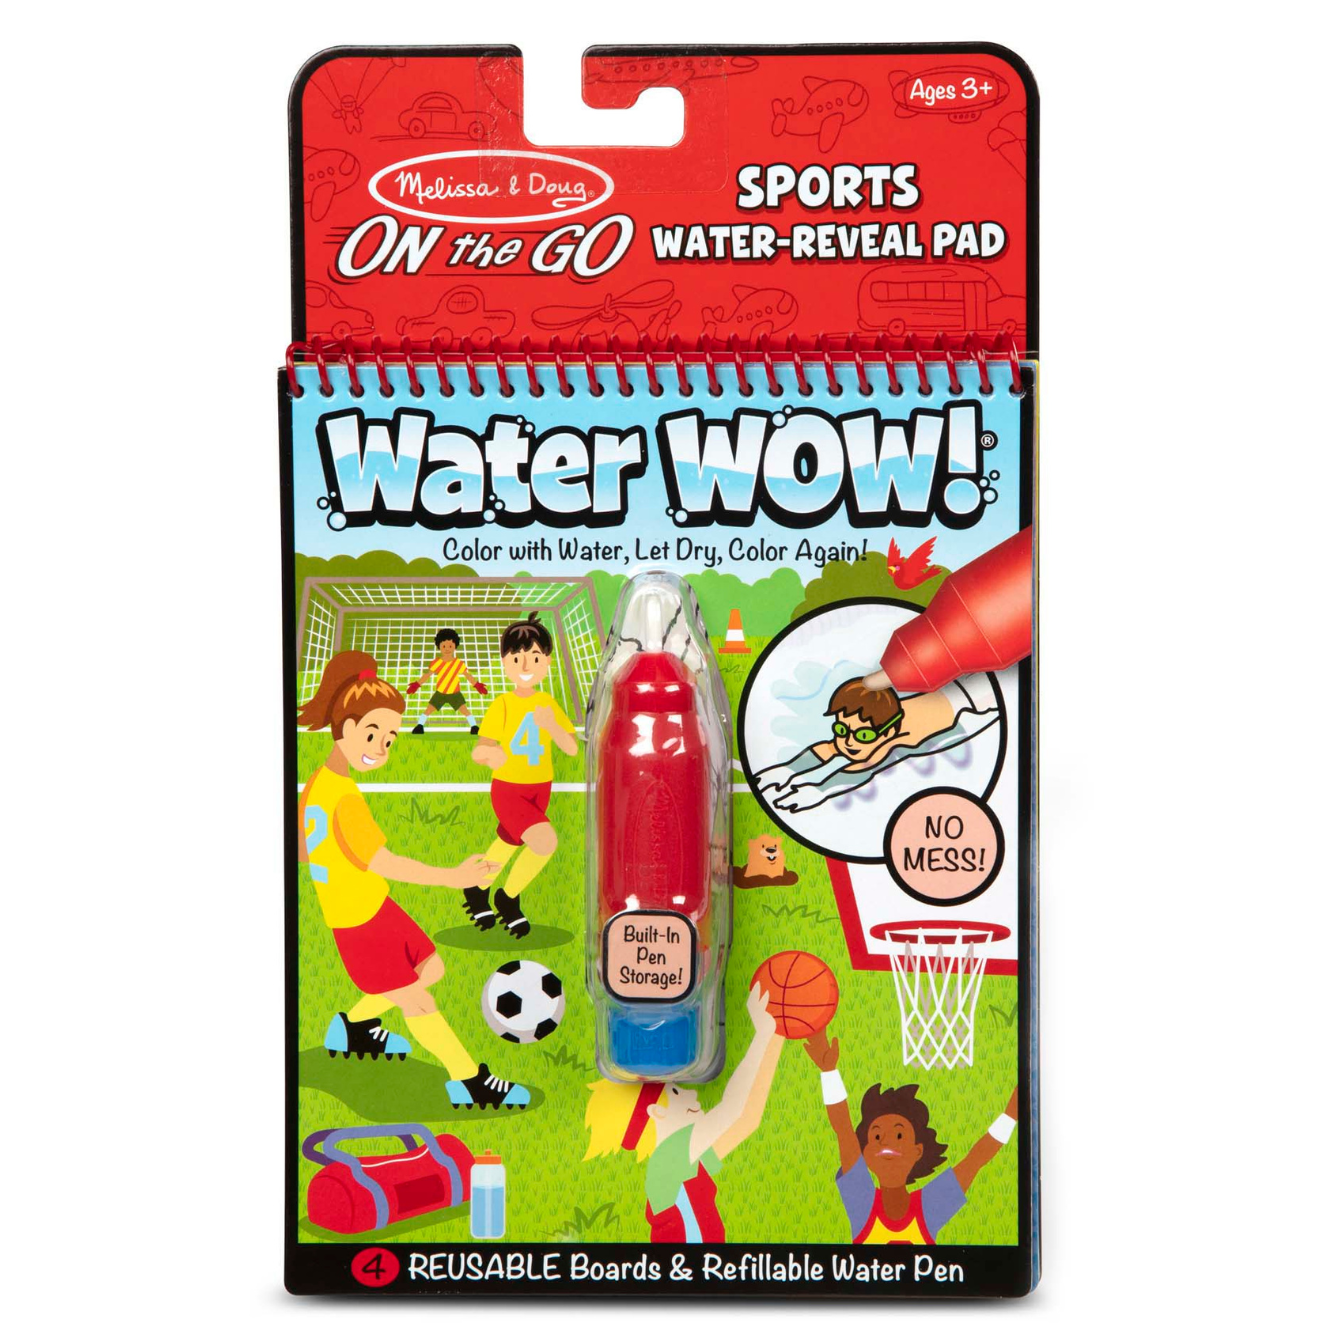 Water Wow! Sports